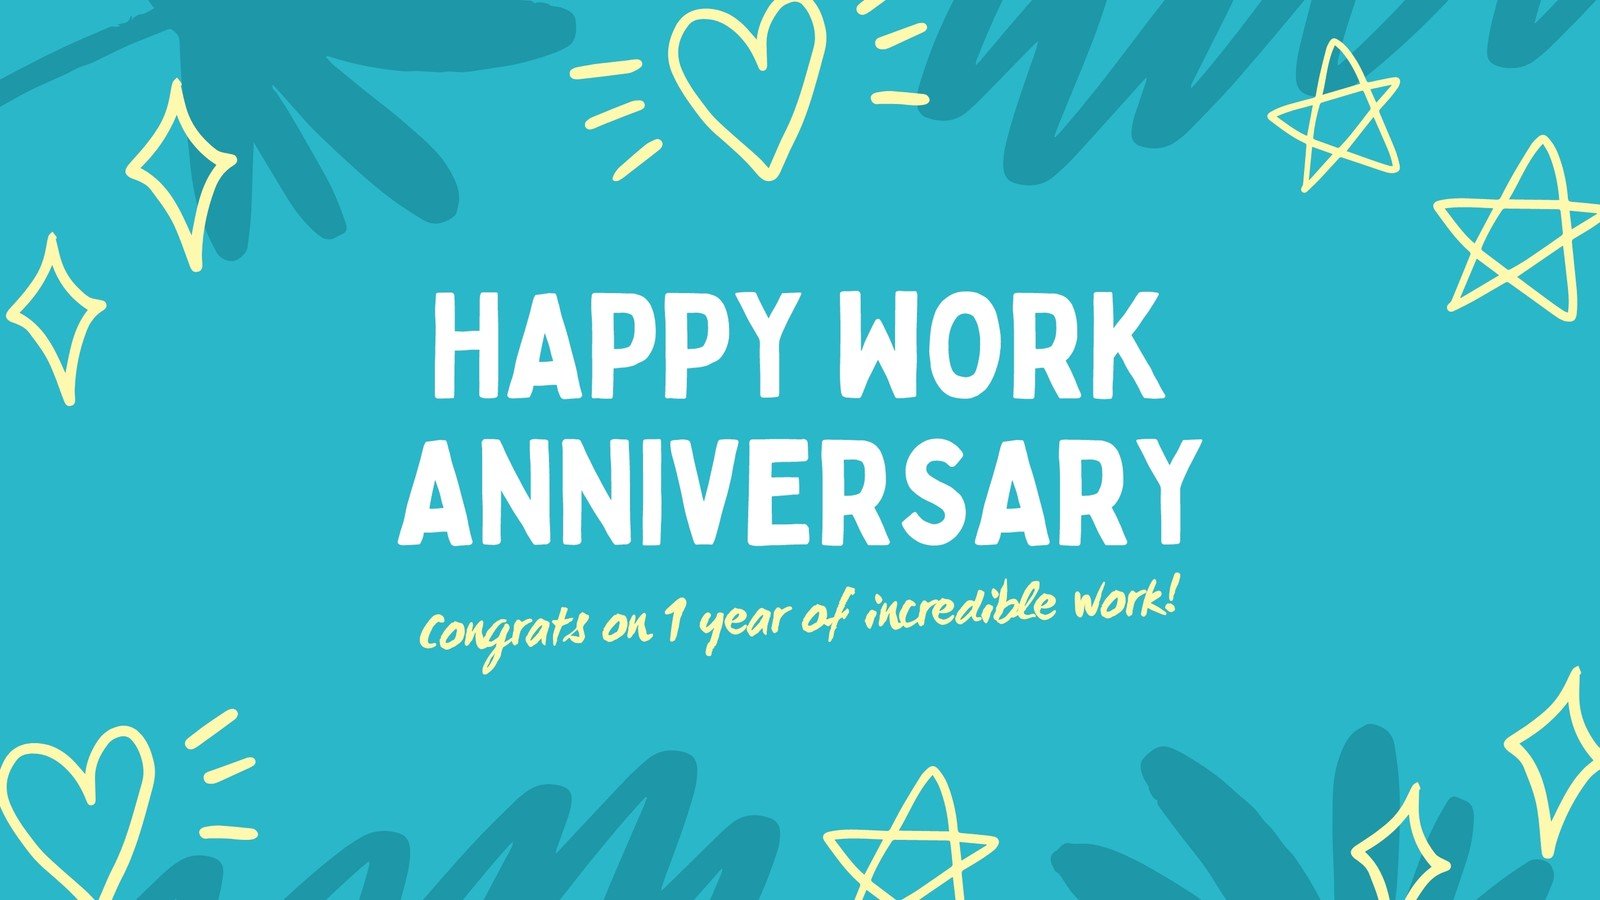 Free anniversary video message templates to edit | Canva